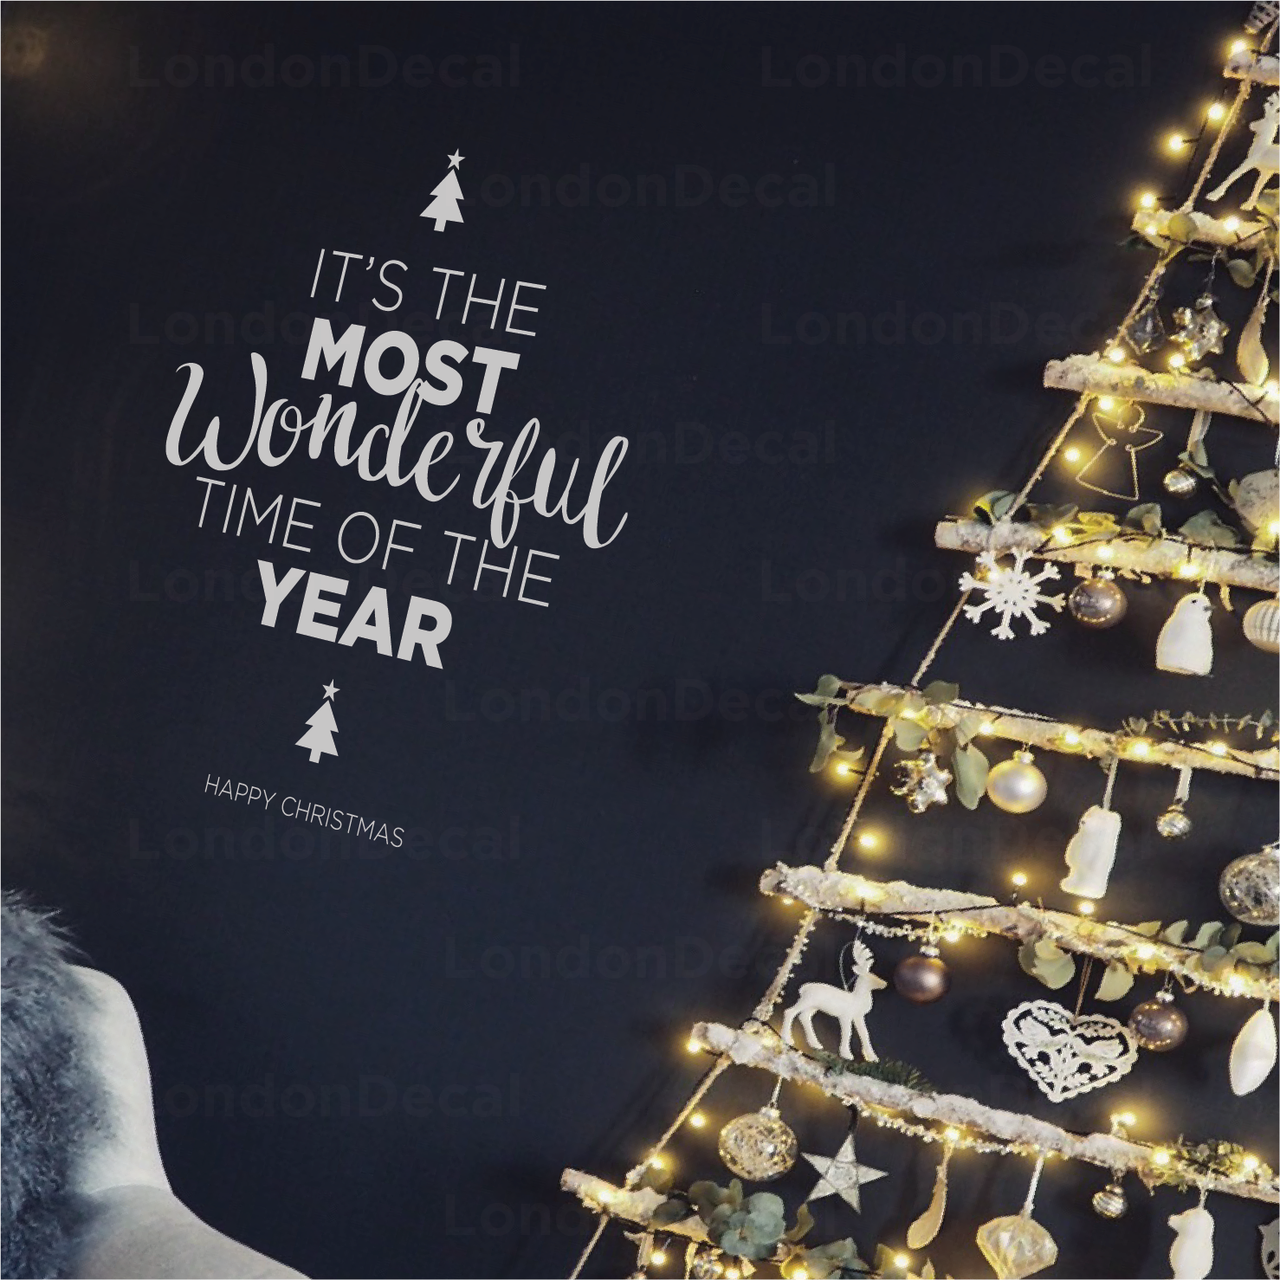 Most Wonderful Time of the Year - Christmas Wall Decal